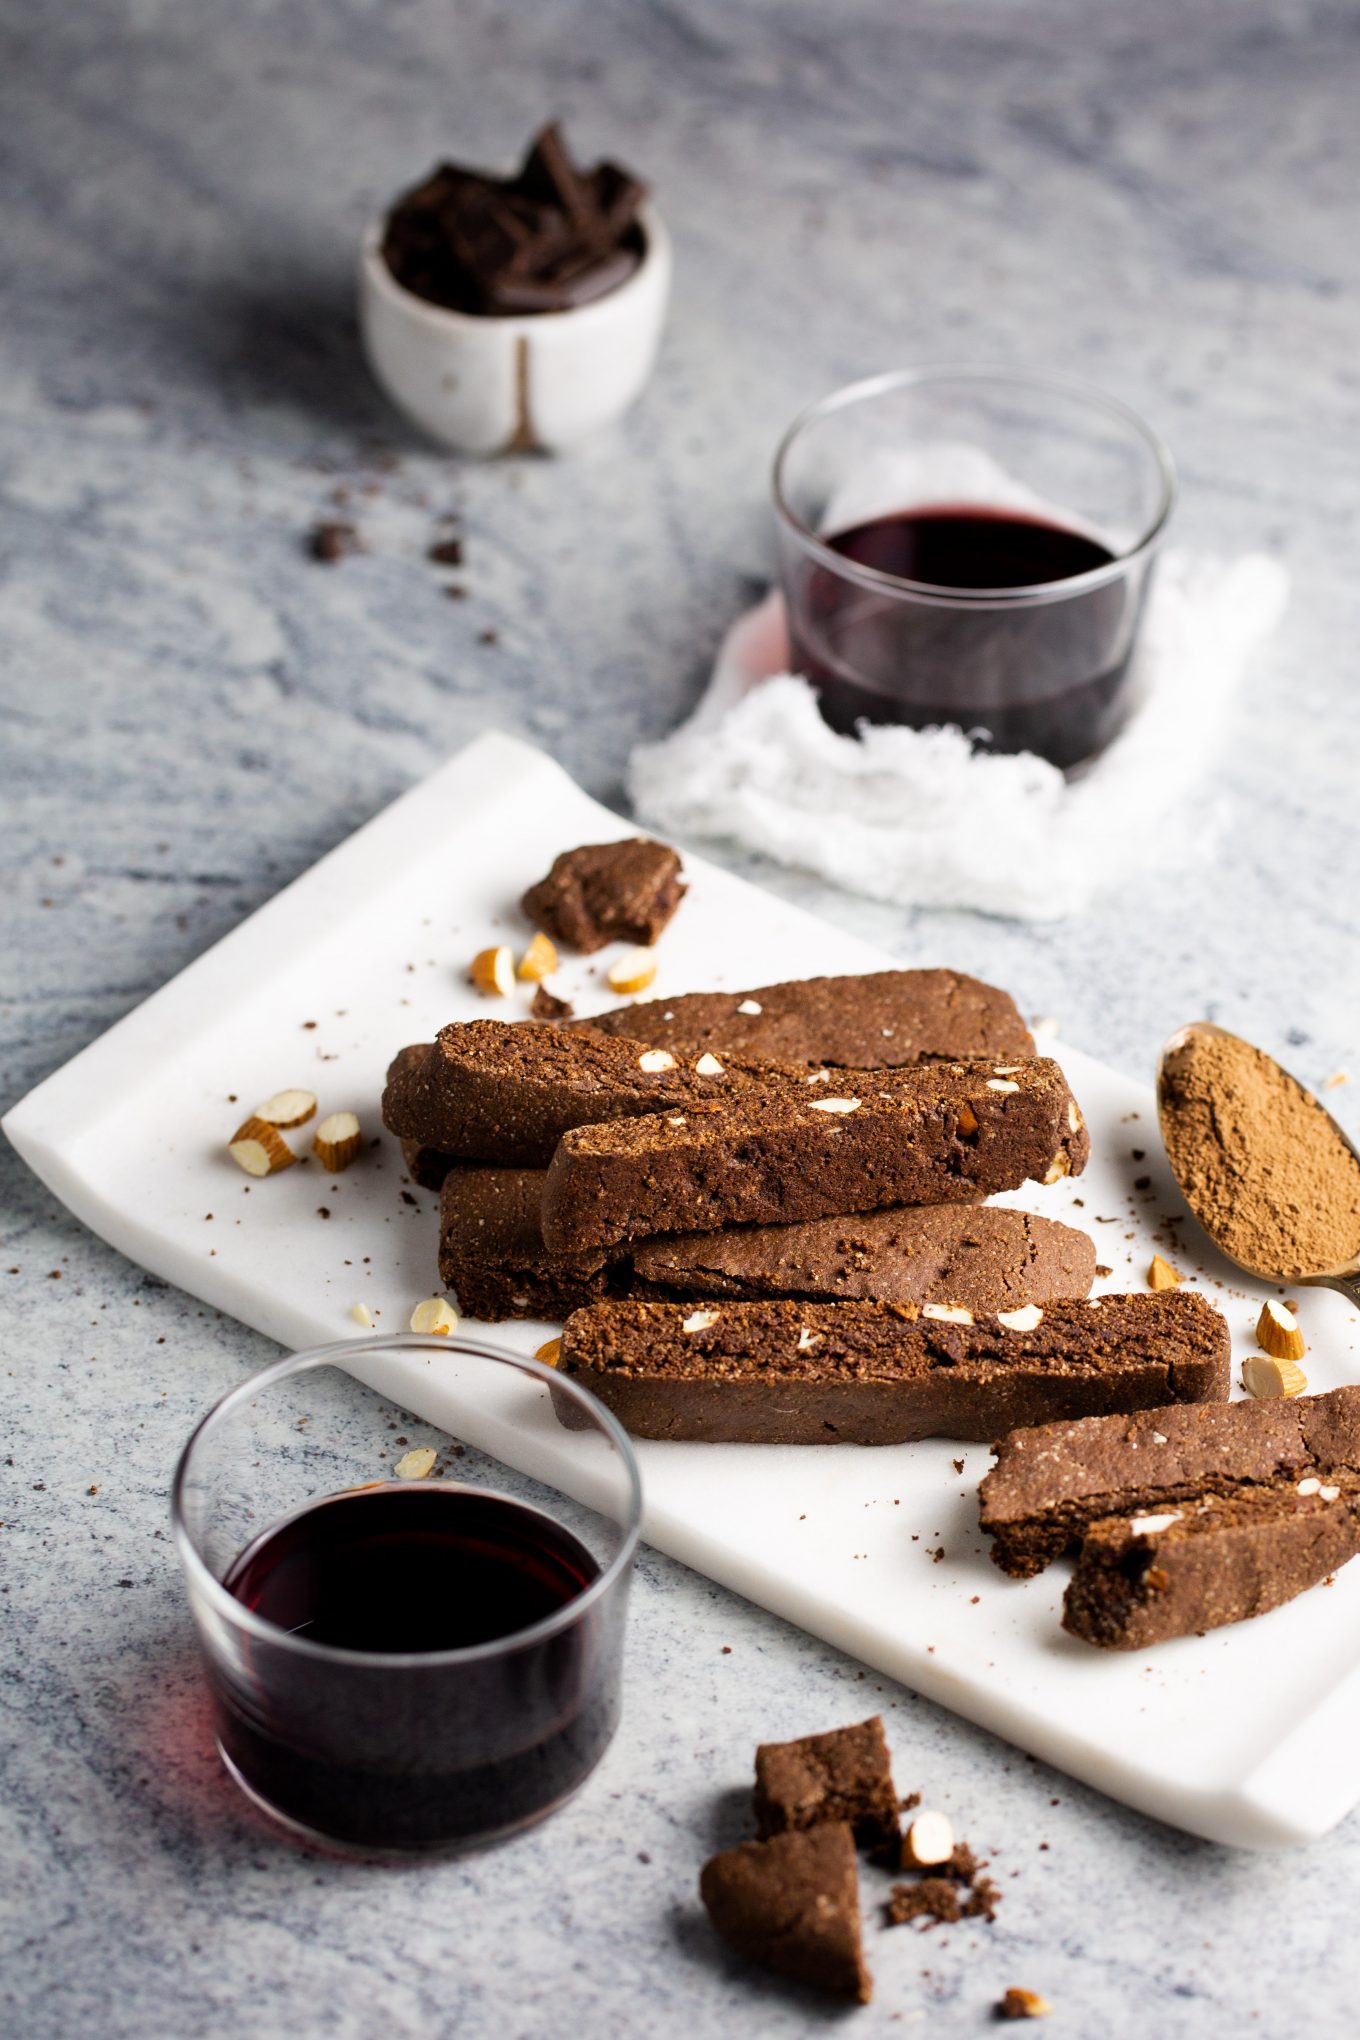 Chocolate biscotti on a white tray and a glass of red wine.